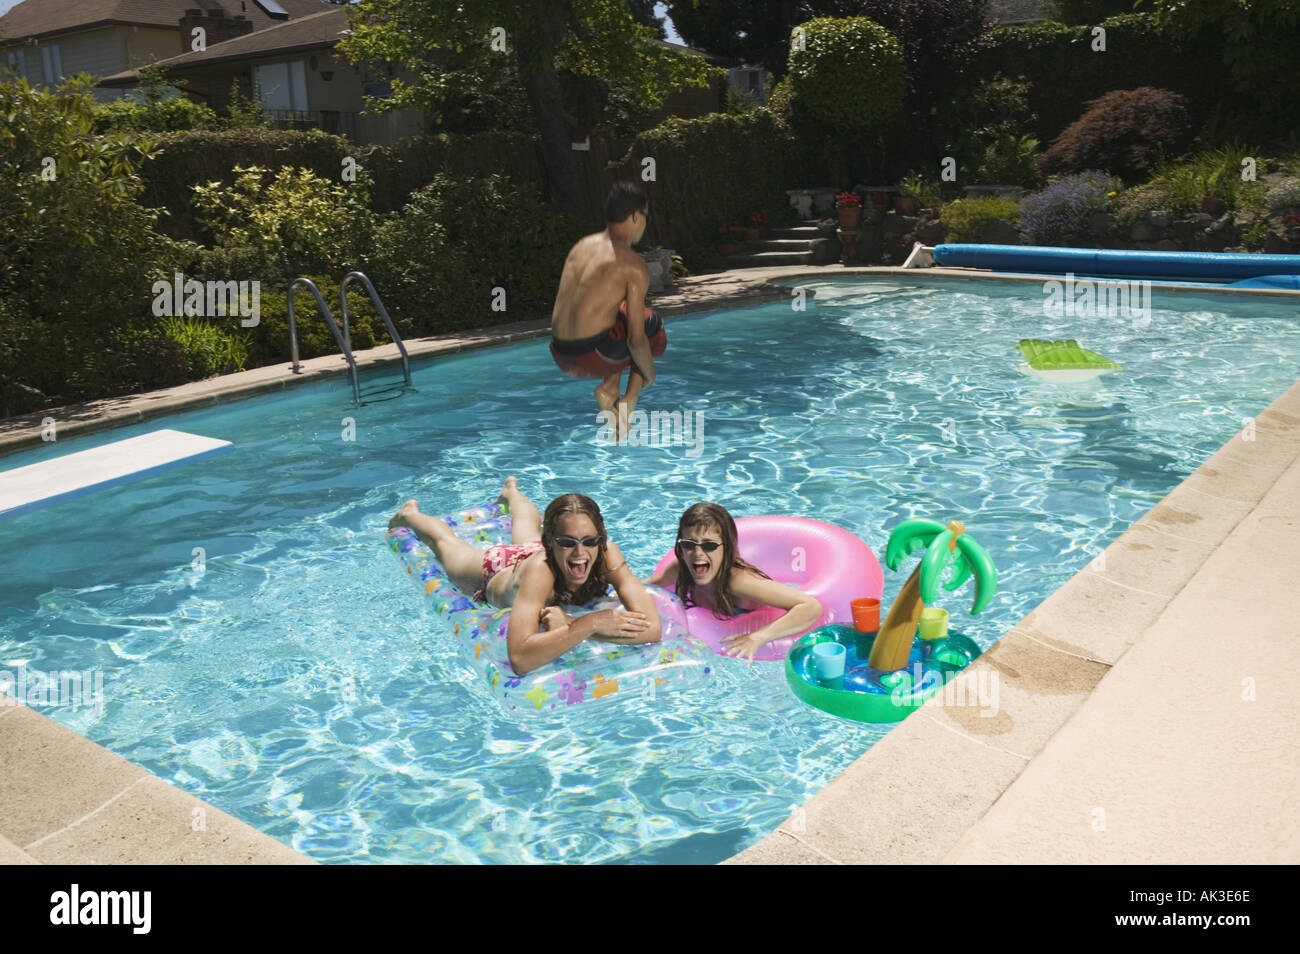 Teenagers playing in a swimming pool Stock Photo